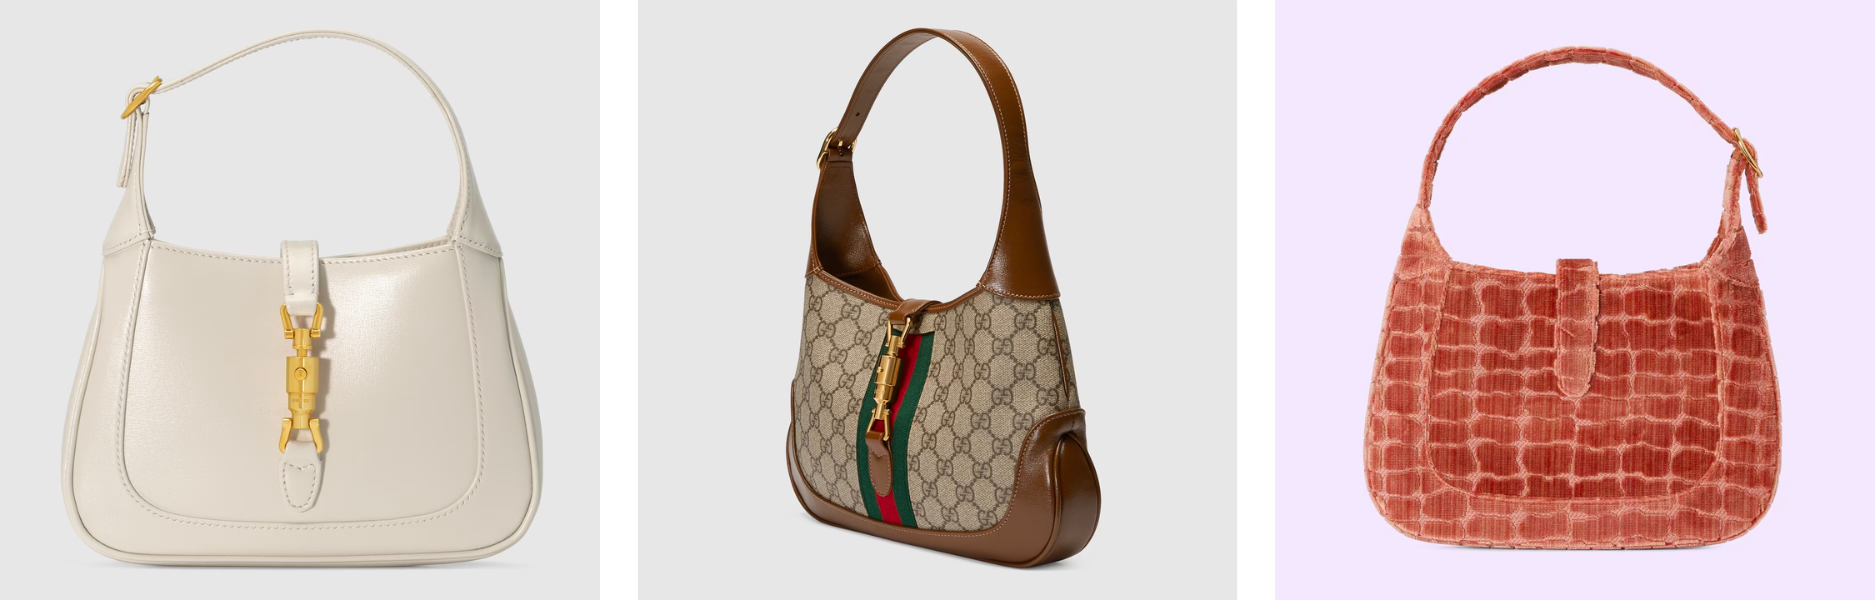 The Timeless Allure of the Gucci Jackie Bag: A Fashion Icon